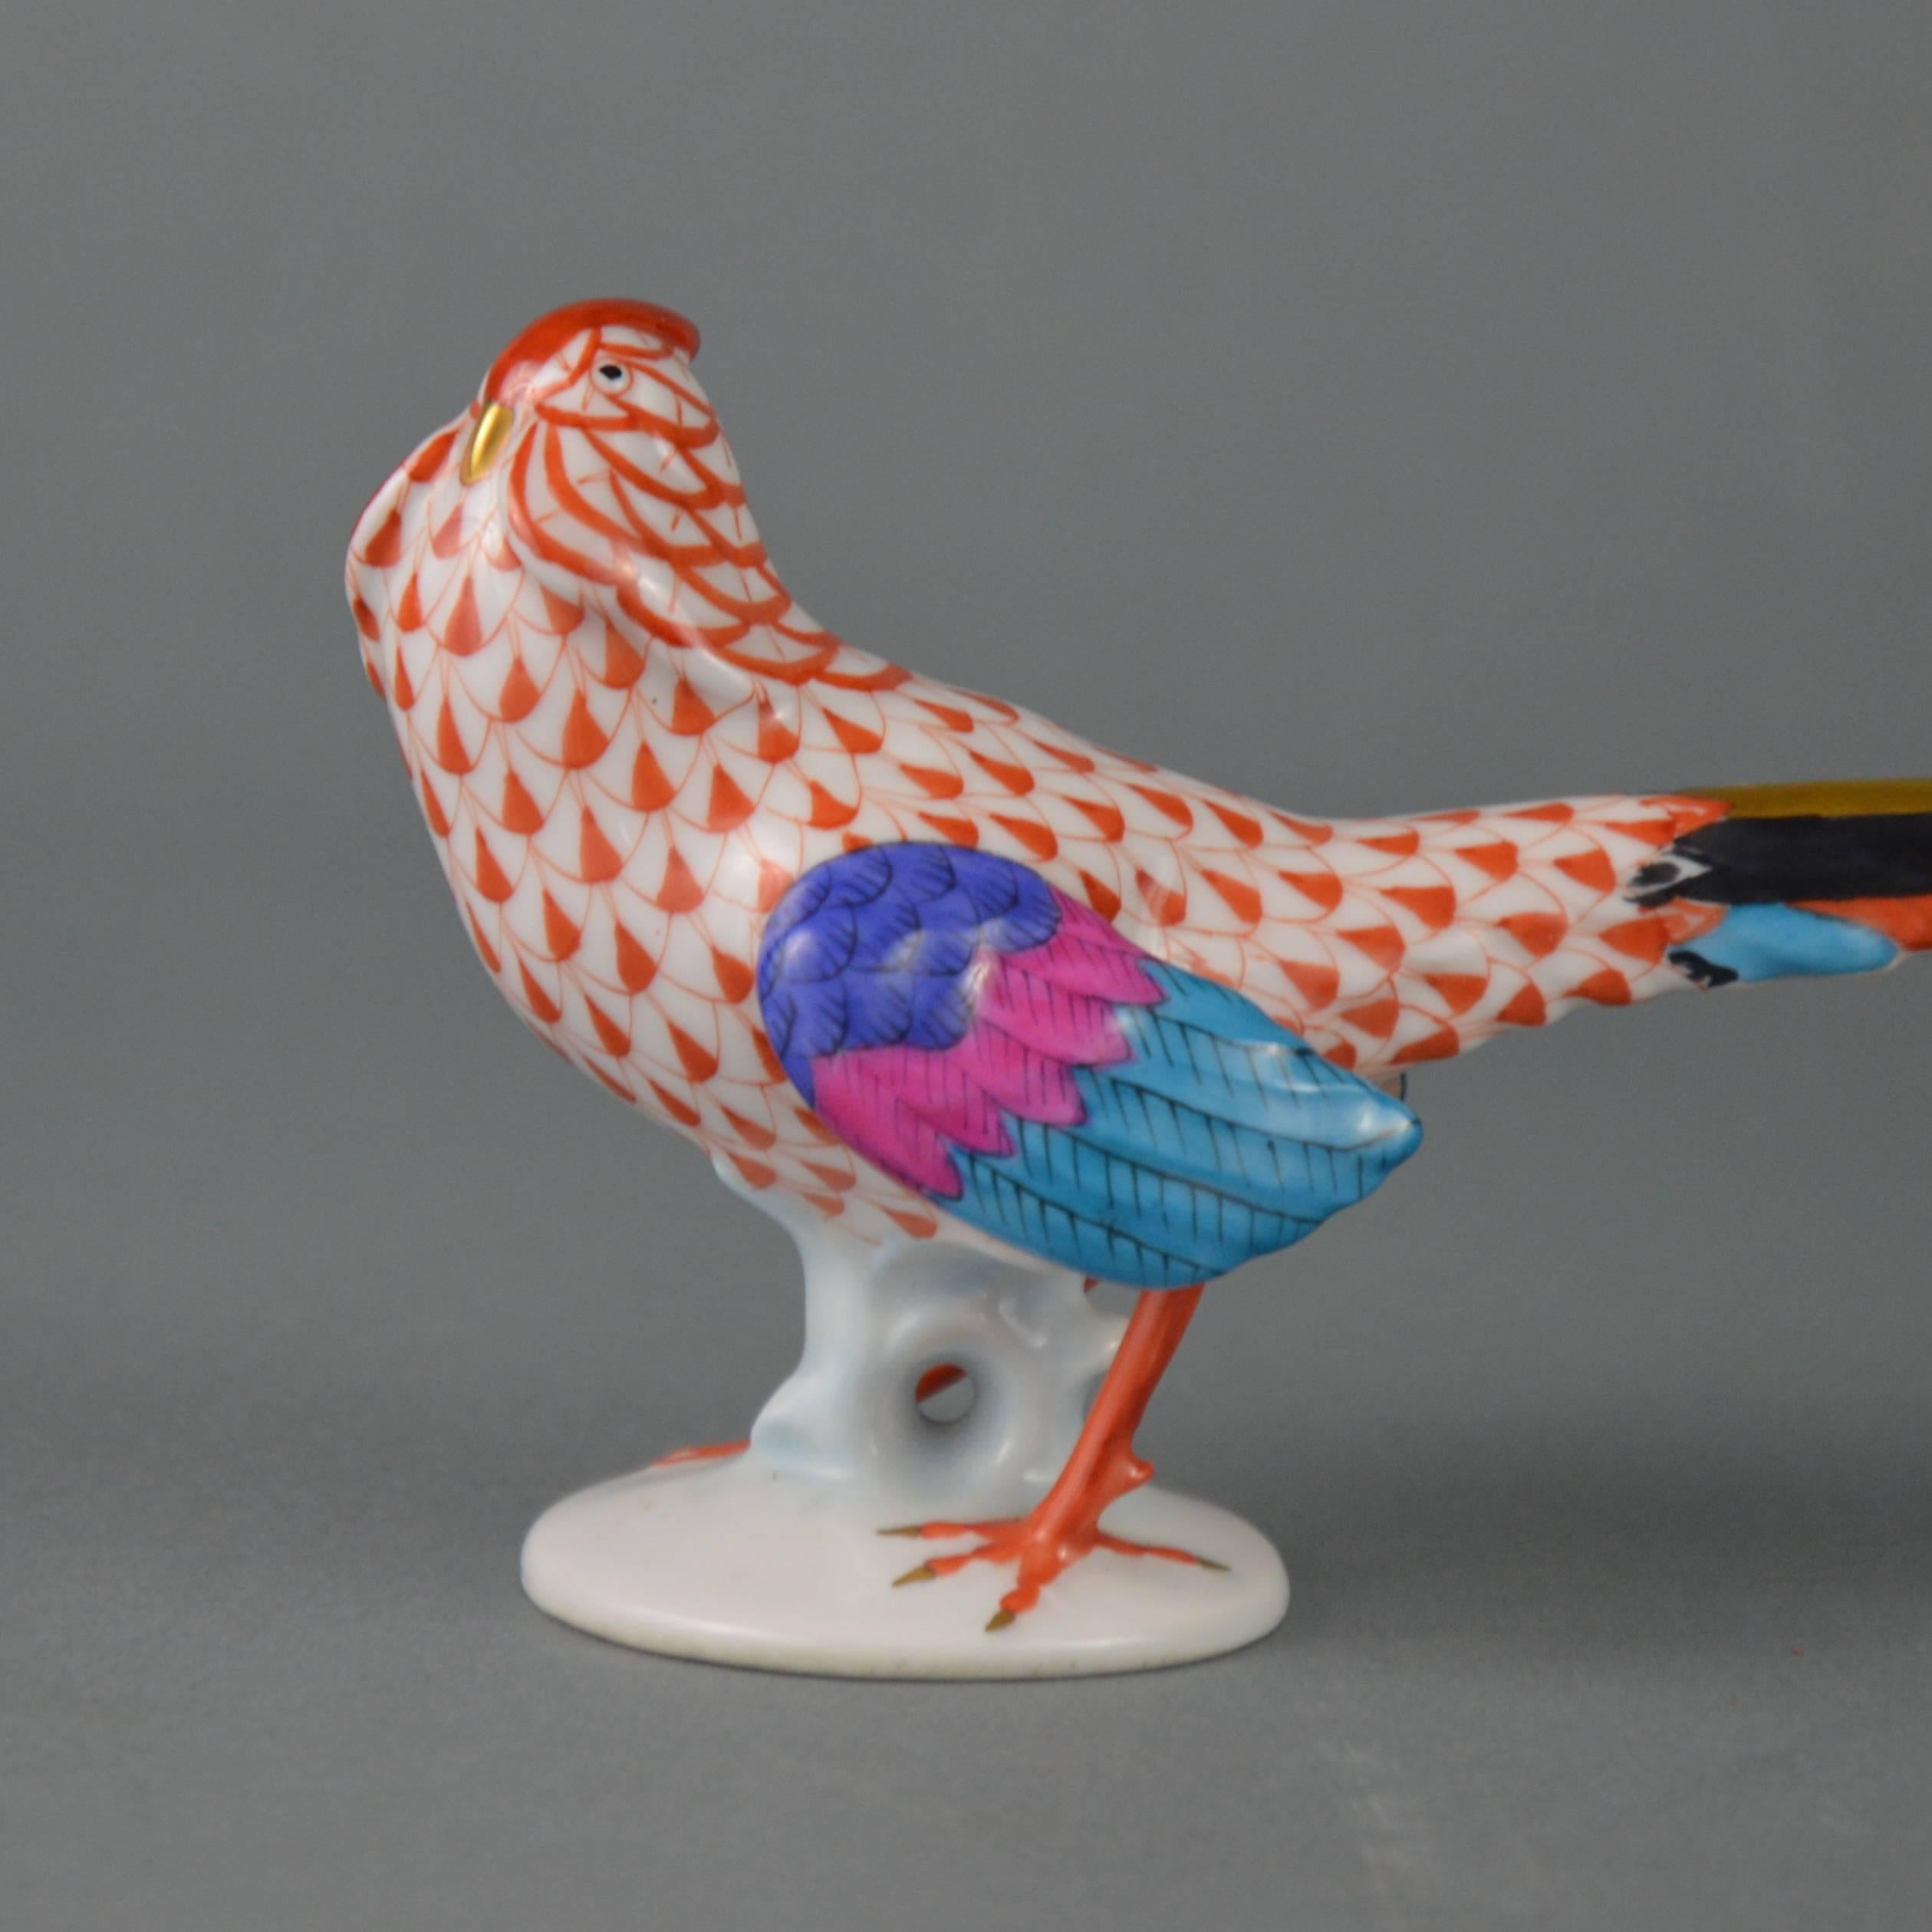 Herend (Hungary) porcelain pheasant figurine decorated with their famous hand-painted fishnet pattern.
Measure: Length 21cm, height 7.5 cm.